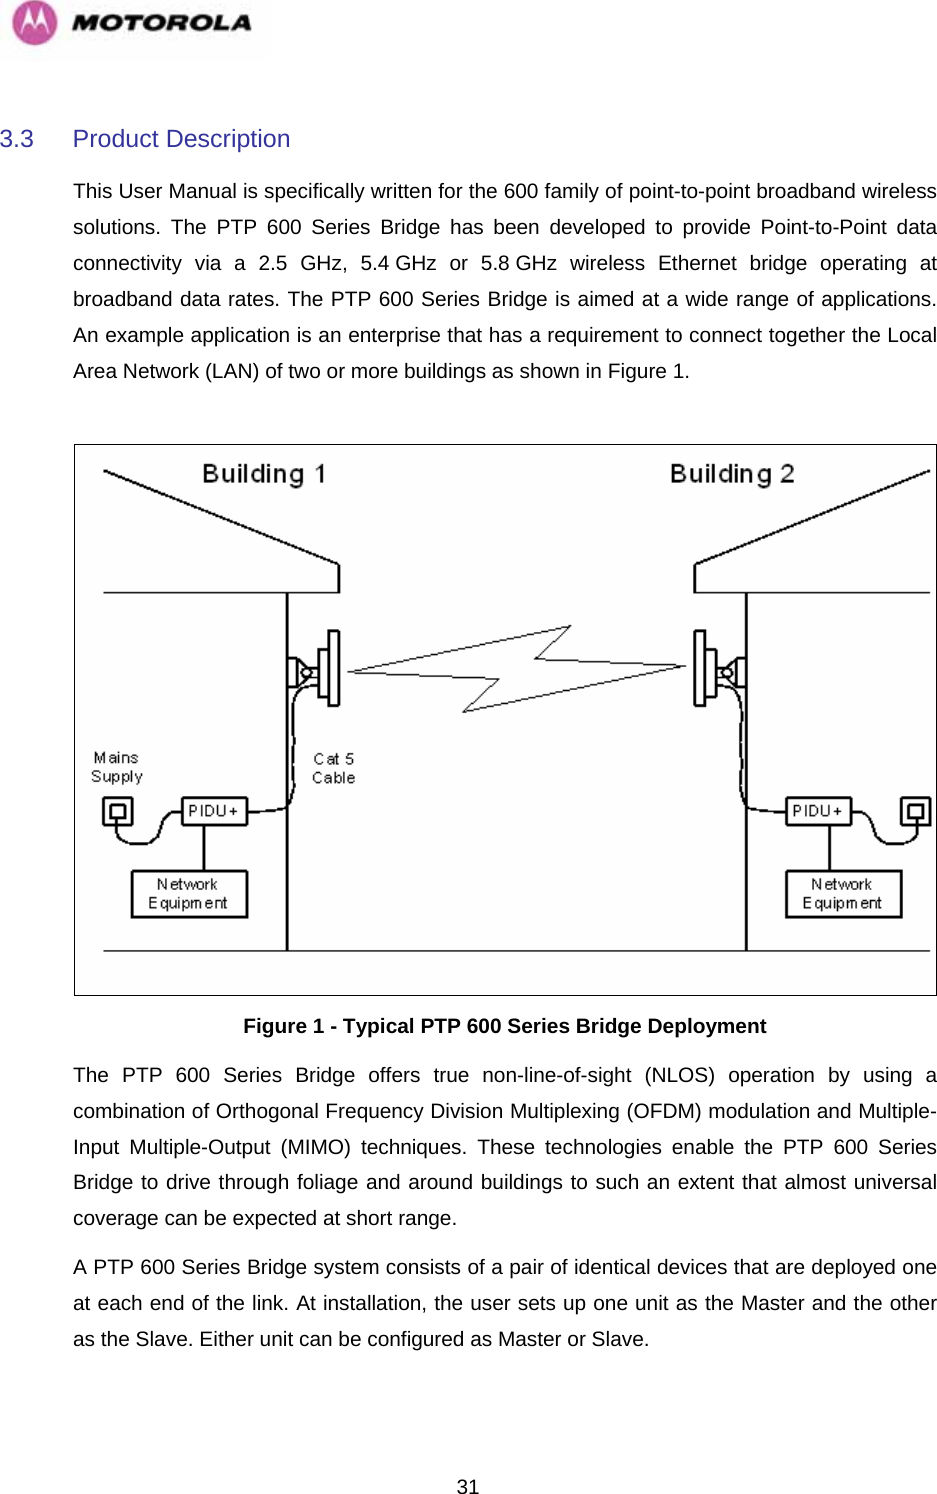   313.3 Product Description This User Manual is specifically written for the 600 family of point-to-point broadband wireless solutions. The PTP 600 Series Bridge has been developed to provide Point-to-Point data connectivity via a 2.5 GHz, 5.4 GHz or 5.8 GHz wireless Ethernet bridge operating at broadband data rates. The PTP 600 Series Bridge is aimed at a wide range of applications. An example application is an enterprise that has a requirement to connect together the Local Area Network (LAN) of two or more buildings as shown in Figure 1.    Figure 1 - Typical PTP 600 Series Bridge Deployment The PTP 600 Series Bridge offers true non-line-of-sight (NLOS) operation by using a combination of Orthogonal Frequency Division Multiplexing (OFDM) modulation and Multiple-Input Multiple-Output (MIMO) techniques. These technologies enable the PTP 600 Series Bridge to drive through foliage and around buildings to such an extent that almost universal coverage can be expected at short range.  A PTP 600 Series Bridge system consists of a pair of identical devices that are deployed one at each end of the link. At installation, the user sets up one unit as the Master and the other as the Slave. Either unit can be configured as Master or Slave.  